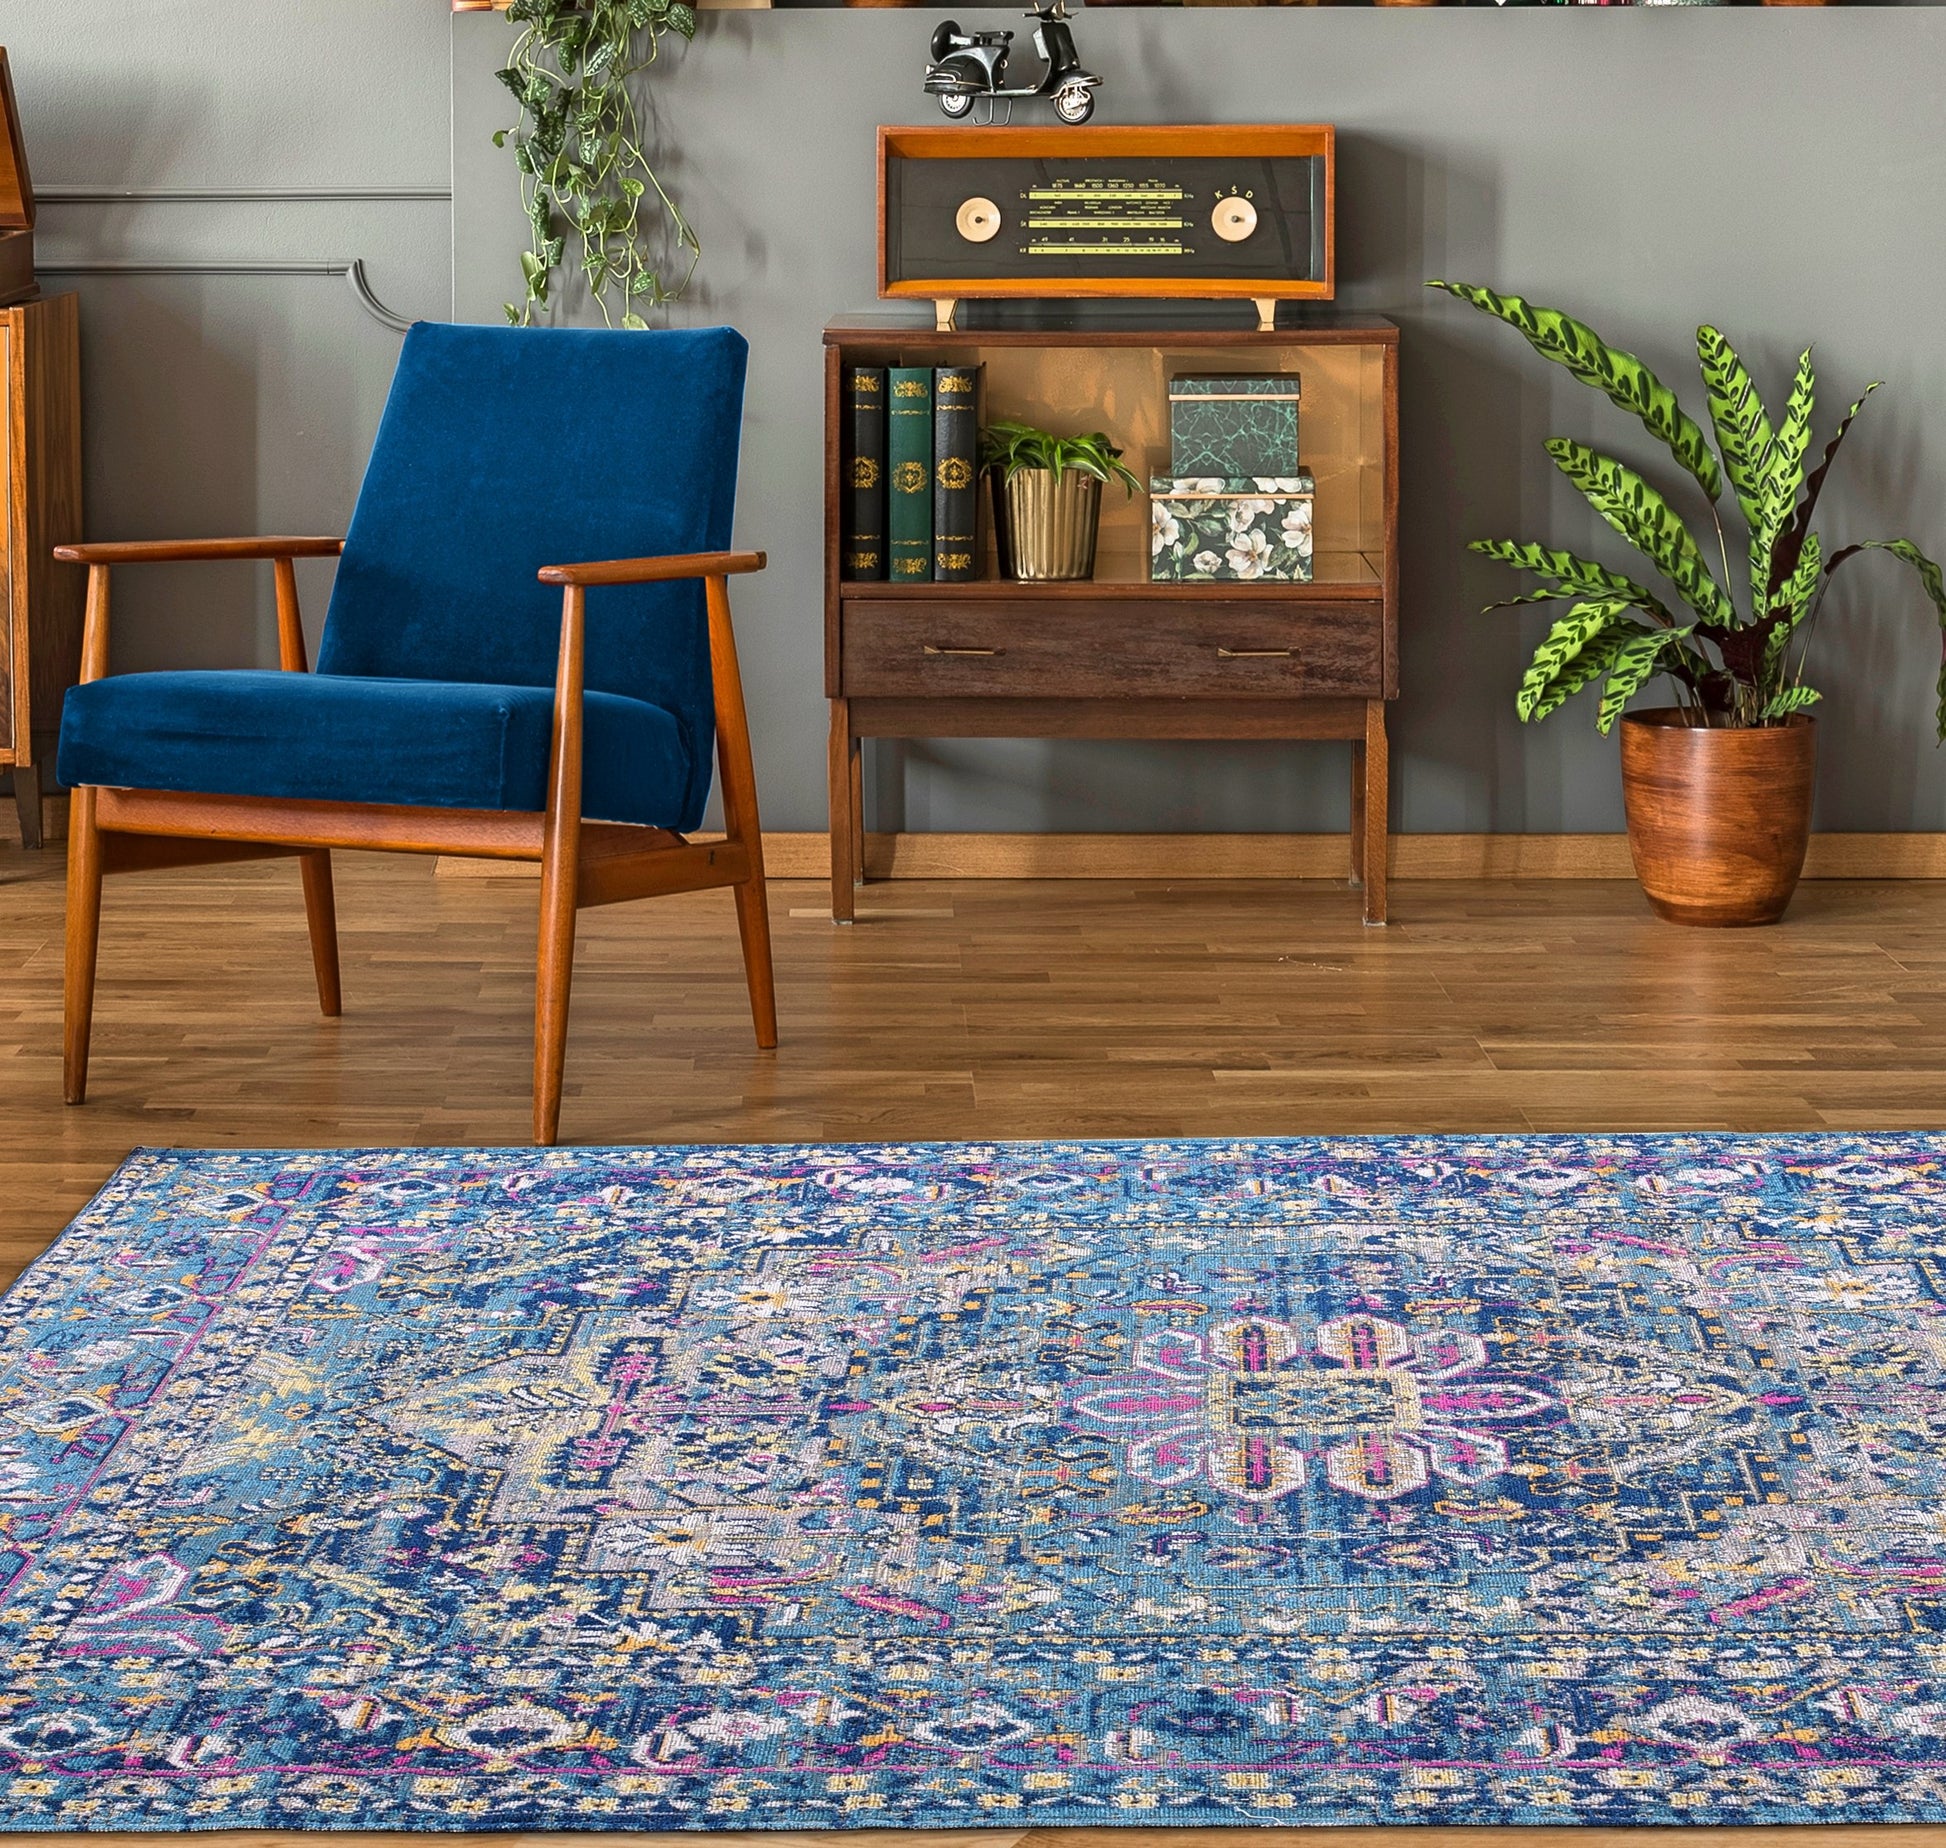 ladole rugs timeless collection rowen beautiful blue traditional outdoor runner 3x5 27 x 411 80cm x 150cm 5x7, 5x8 ft Contemporary, Living Room Carpet, Bedroom, Home Office